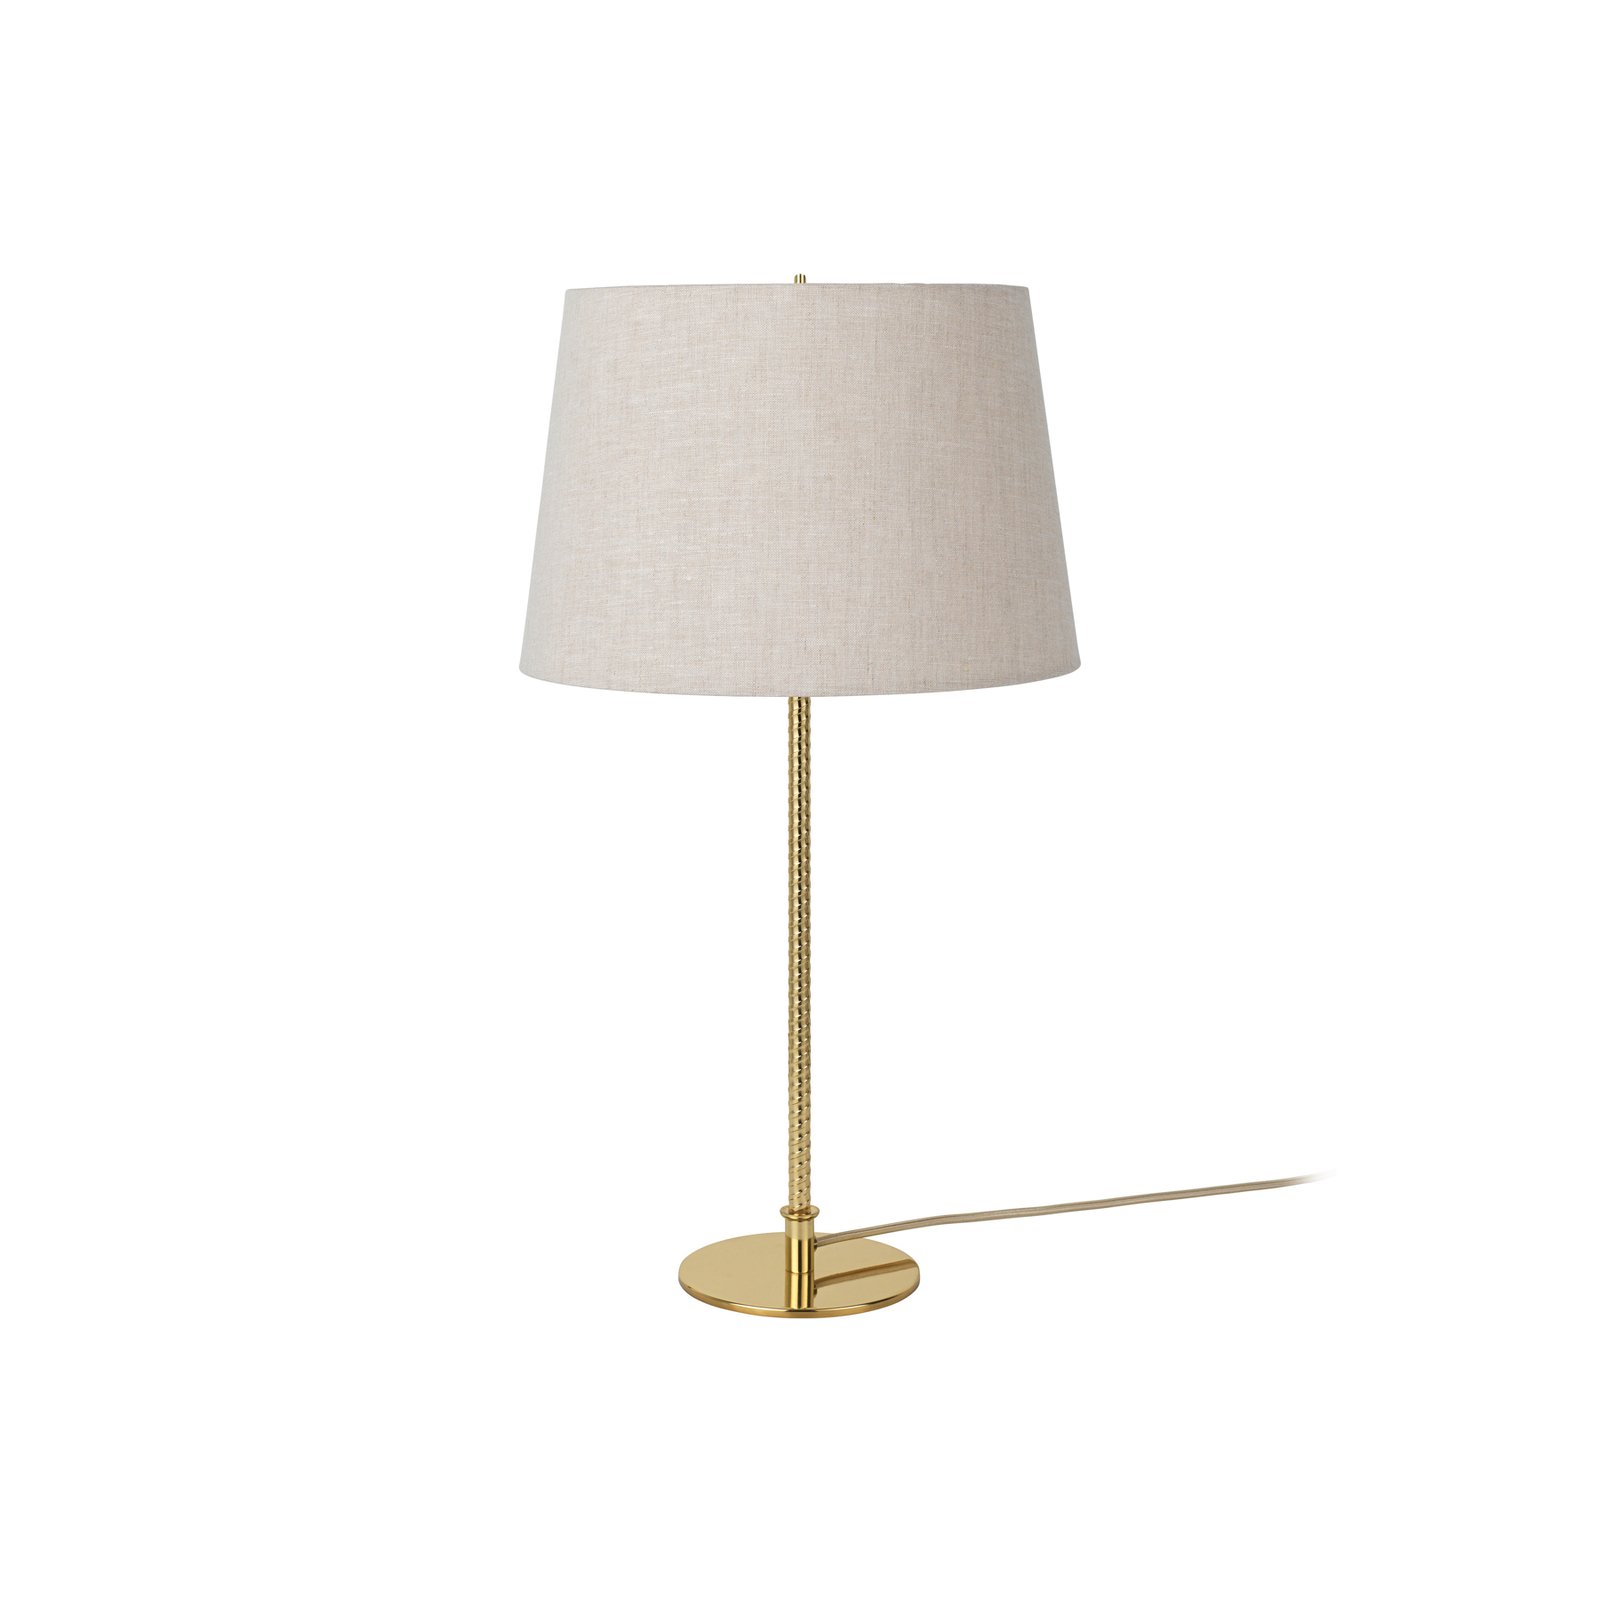 GUBI table lamp 9205, brass, Canvas lampshade, height 58 cm